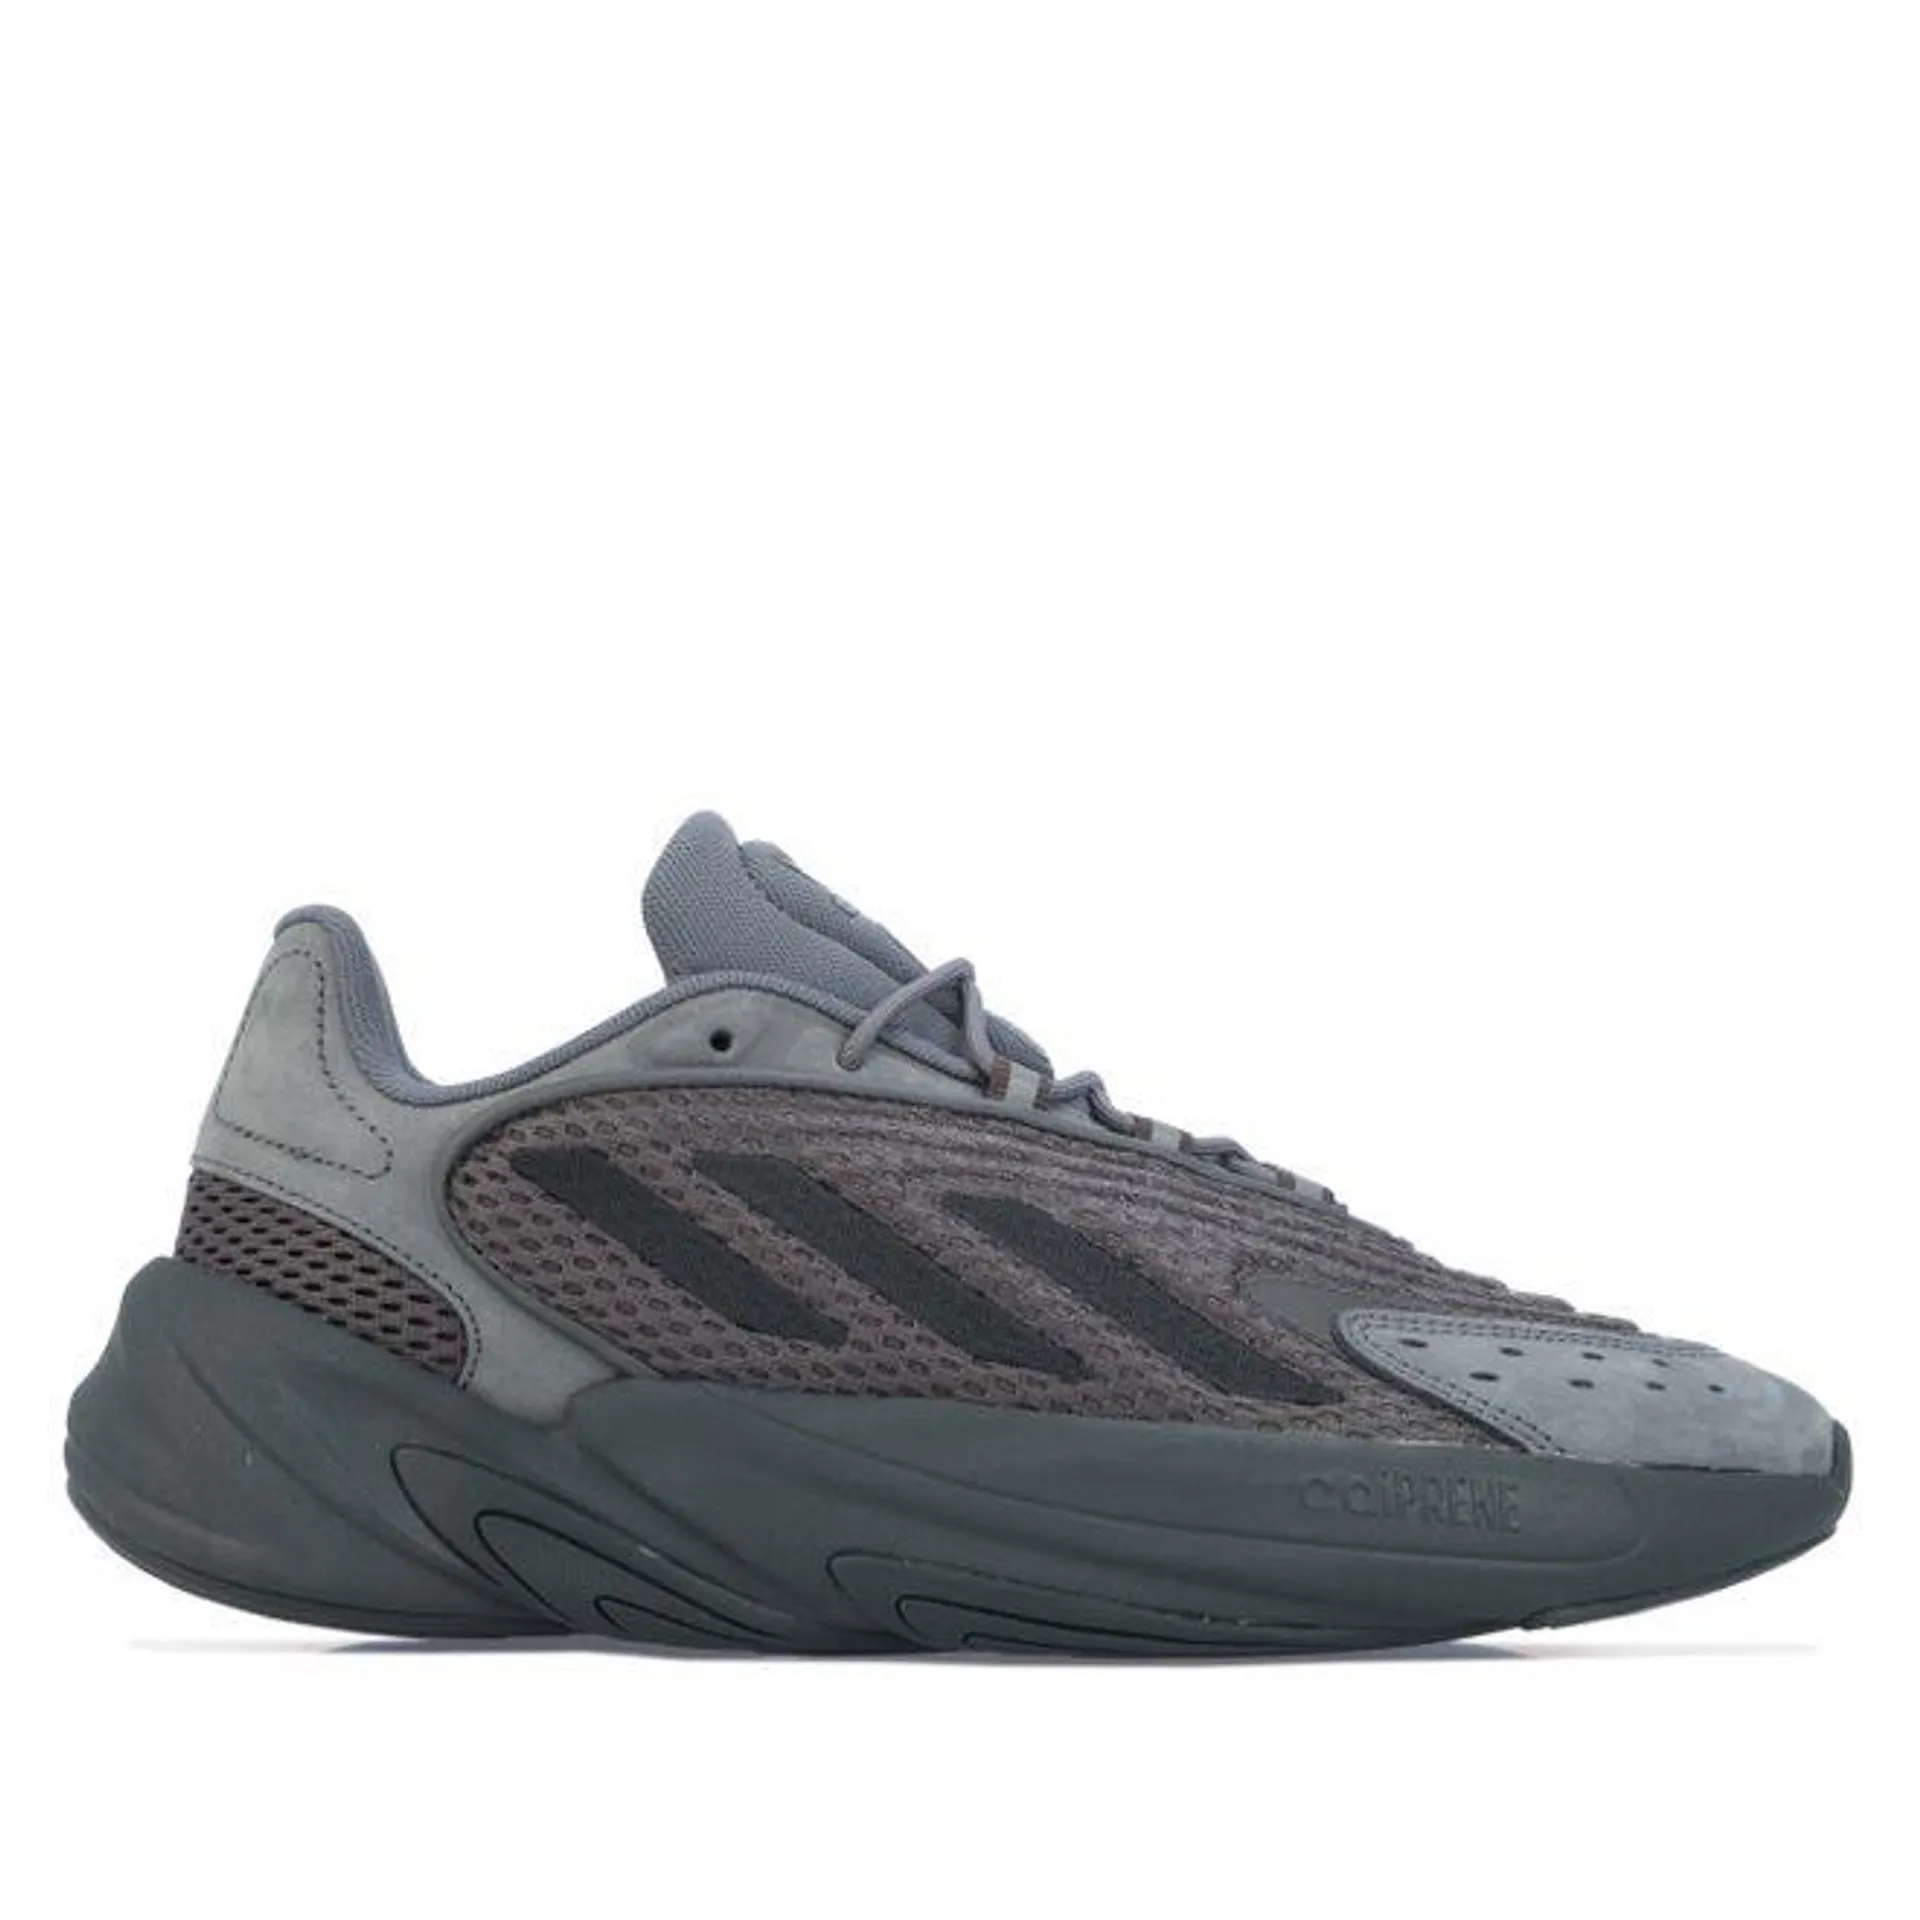 adidas Originals Mens Ozelia Trainers in Charcoal